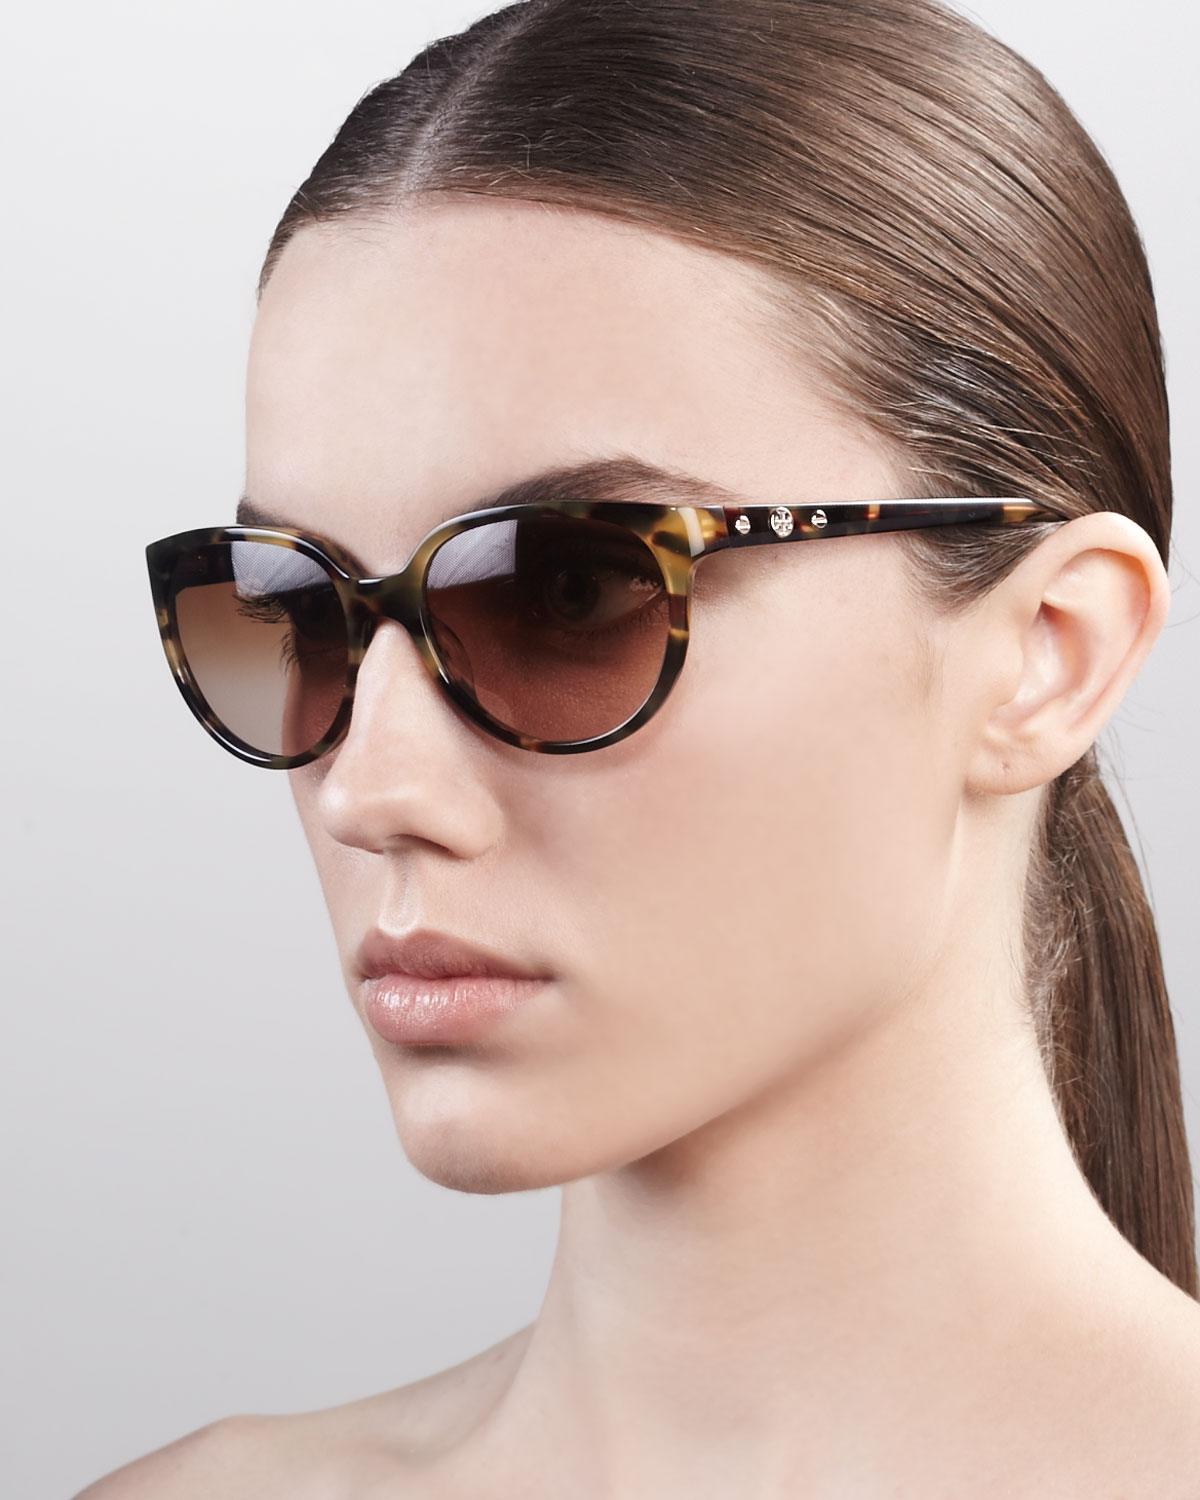 Lyst - Tory Burch Thin Oval Sunglasses in Brown